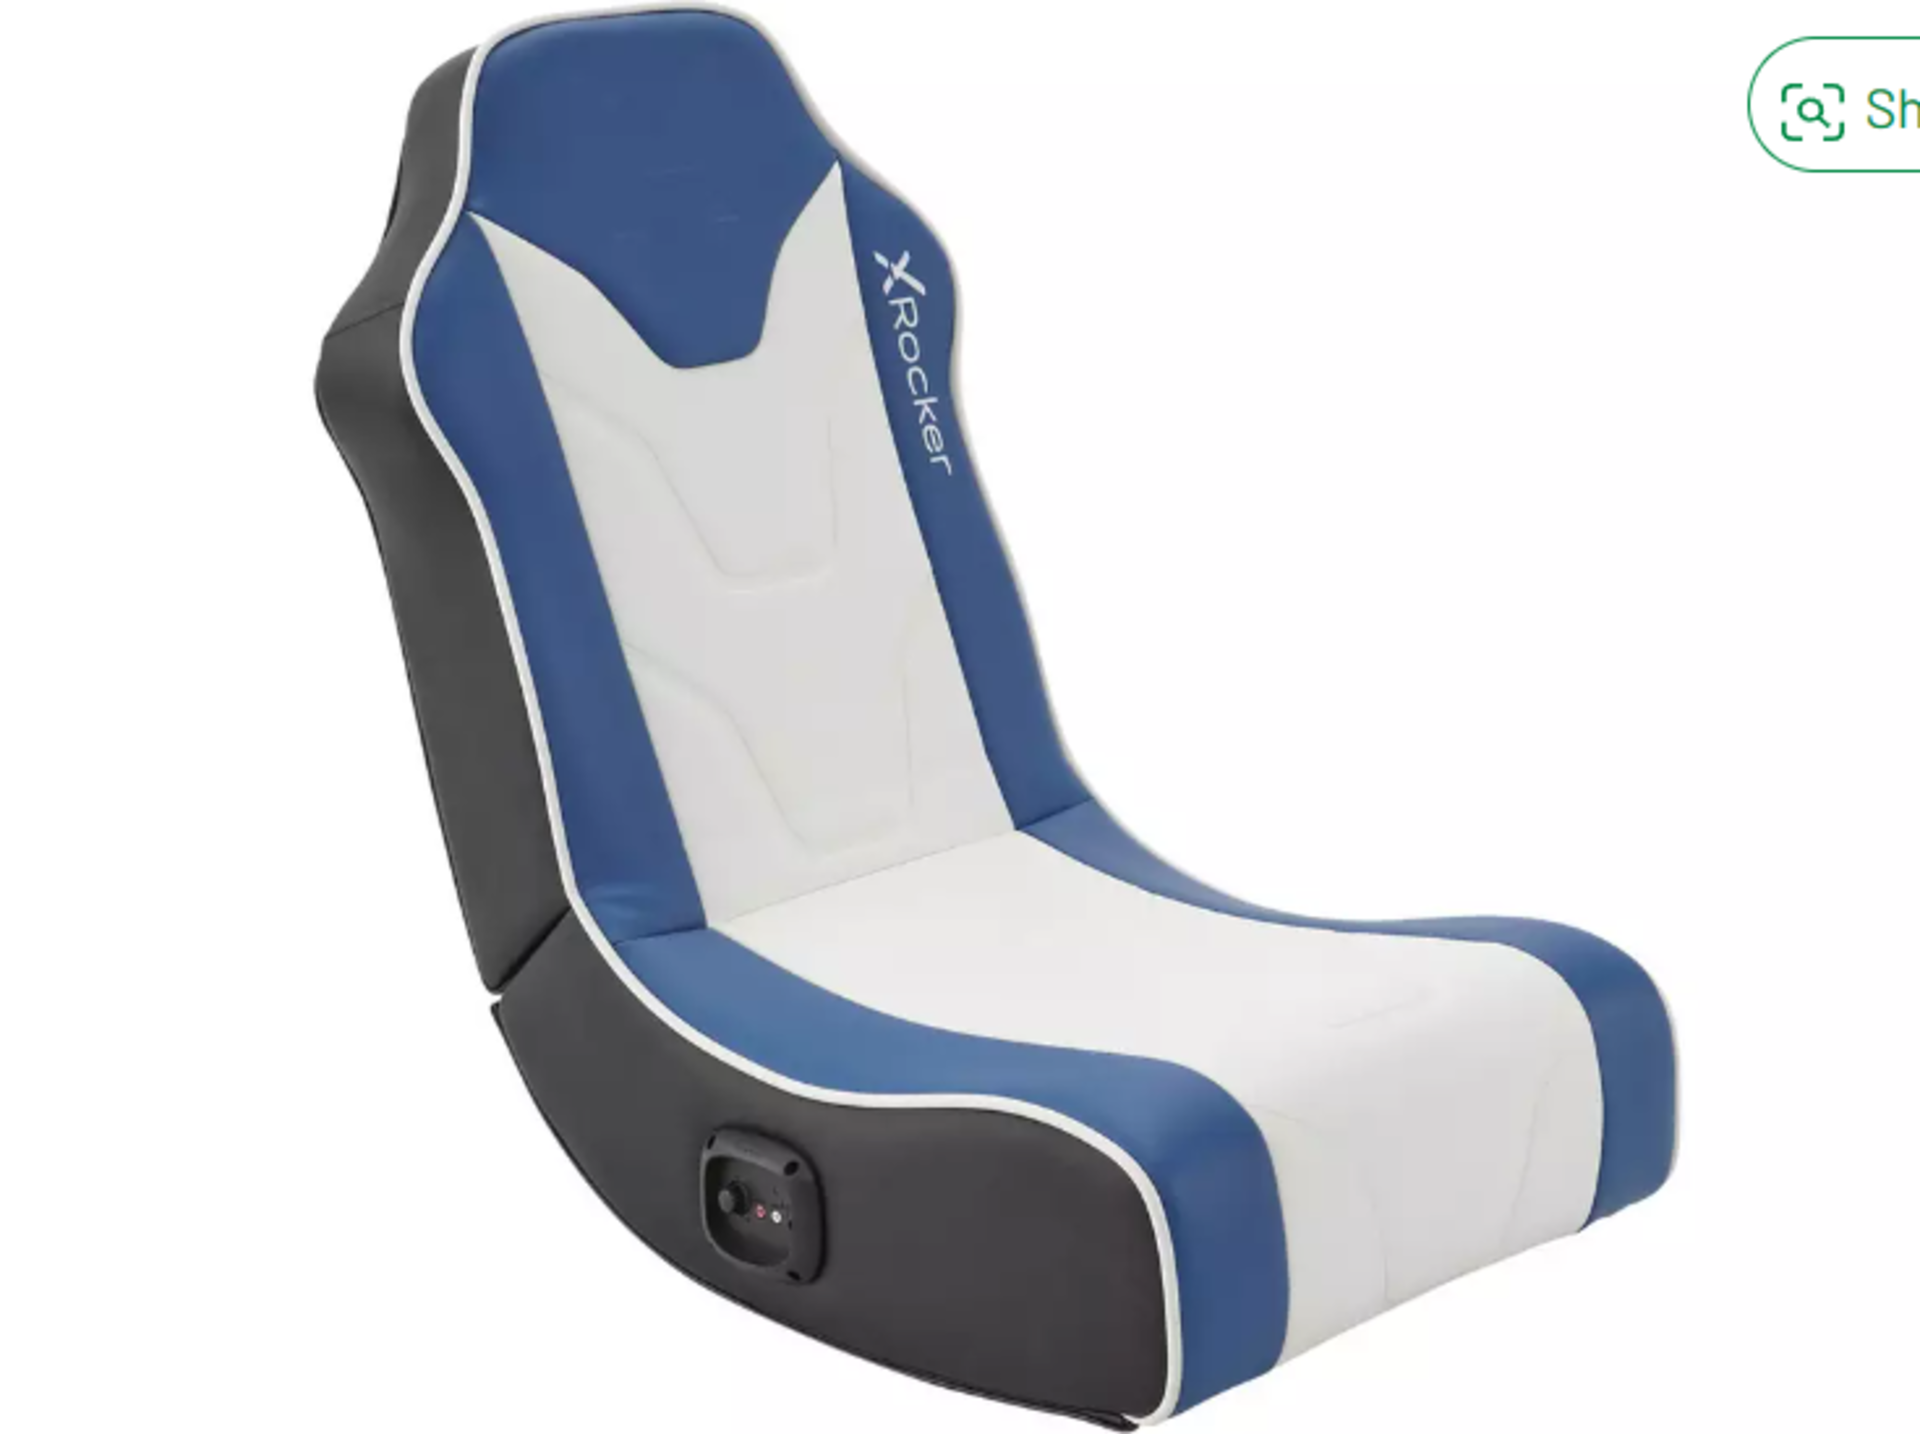 X Rocker Chimera 2.0 Stereo Audio Gaming Chair - Blue. RRP £109.00. Styled for the junior eSports